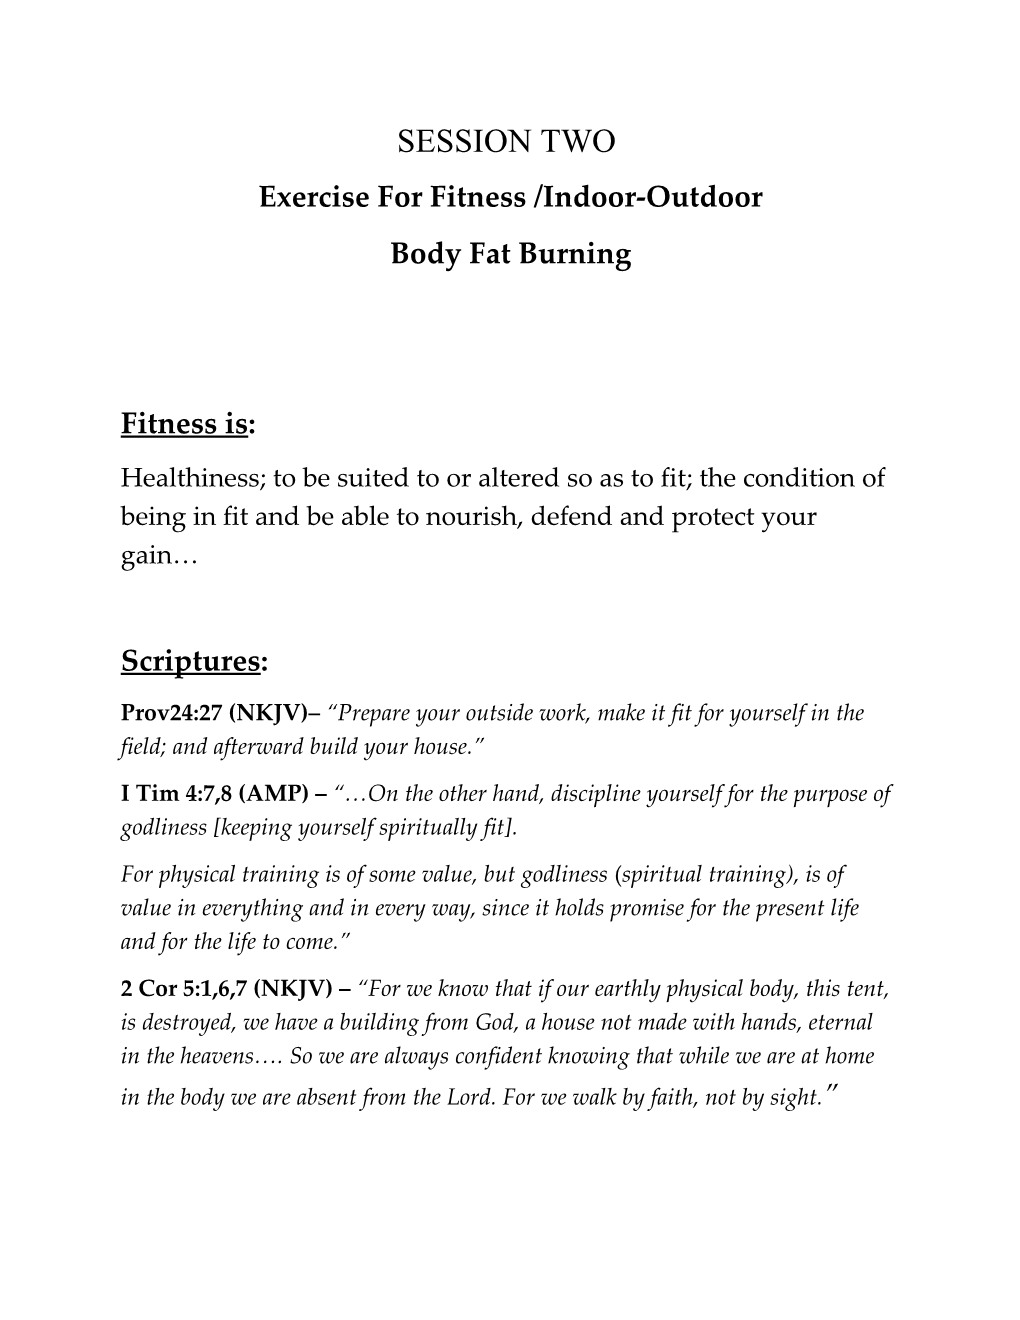 Exercise for Fitness /Indoor-Outdoor